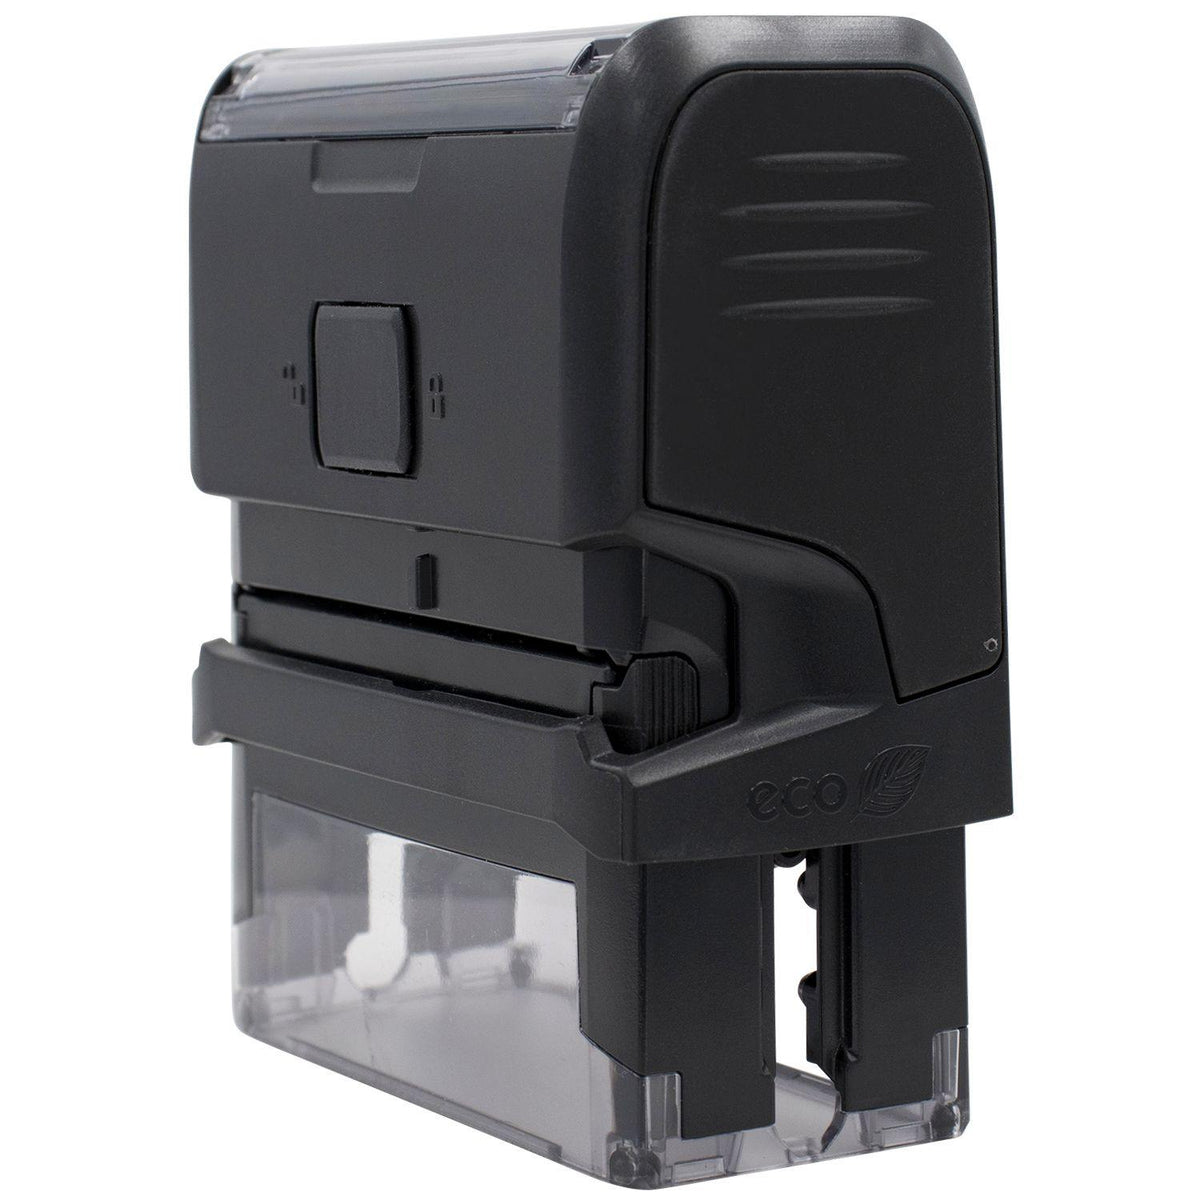 Self-Inking Formas Stamp - Engineer Seal Stamps - Brand_Trodat, Impression Size_Small, Stamp Type_Self-Inking Stamp, Type of Use_General, Type of Use_Office, Type of Use_Professional